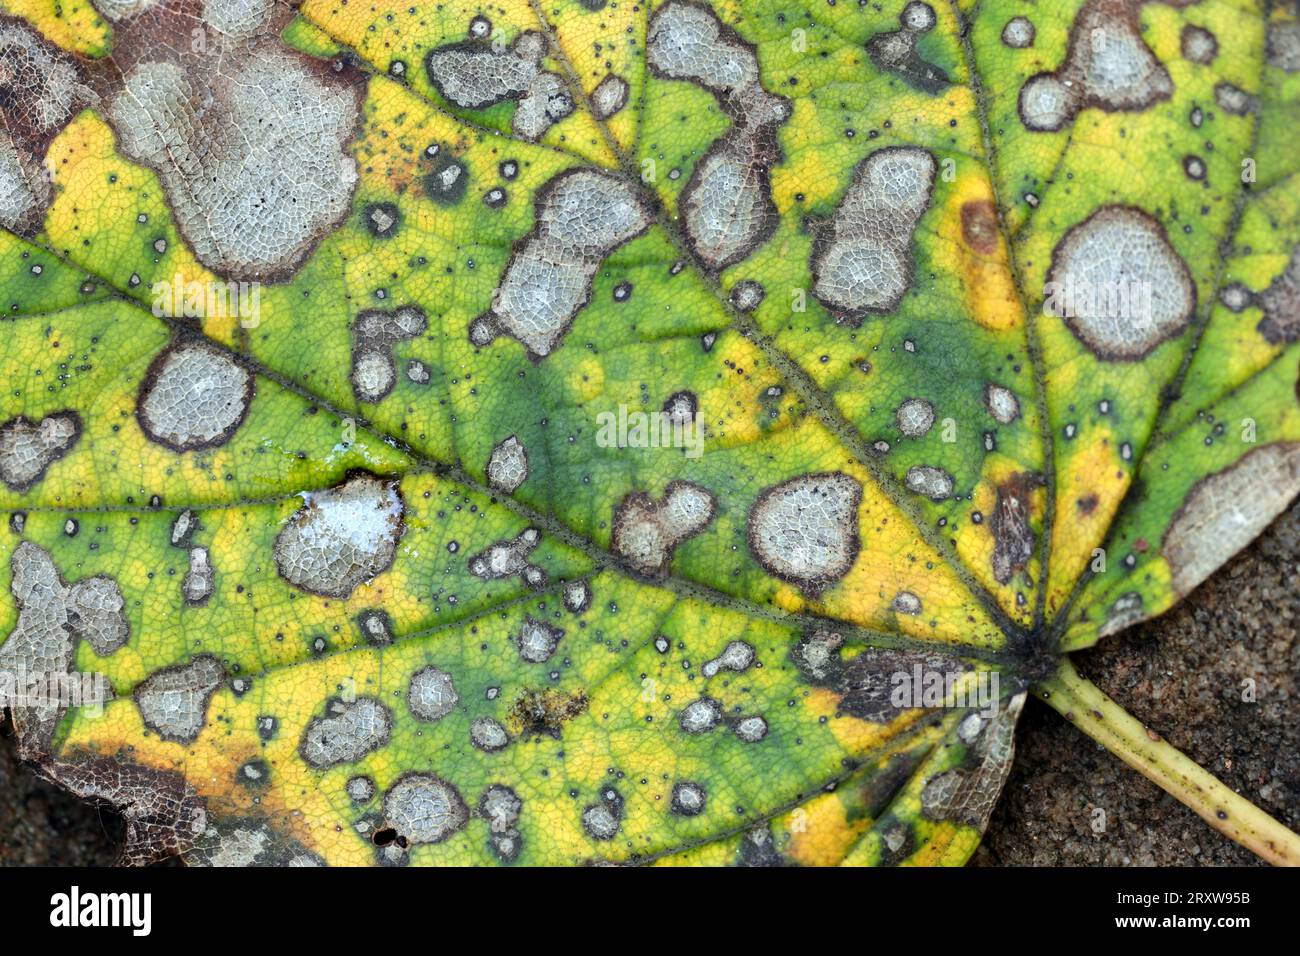 Decaying Sycamore Leaf (Acer pseudoplatanus) affected by Tar Spot Fungus in Autumn, Teesdale, County Durham, UK Stock Photo